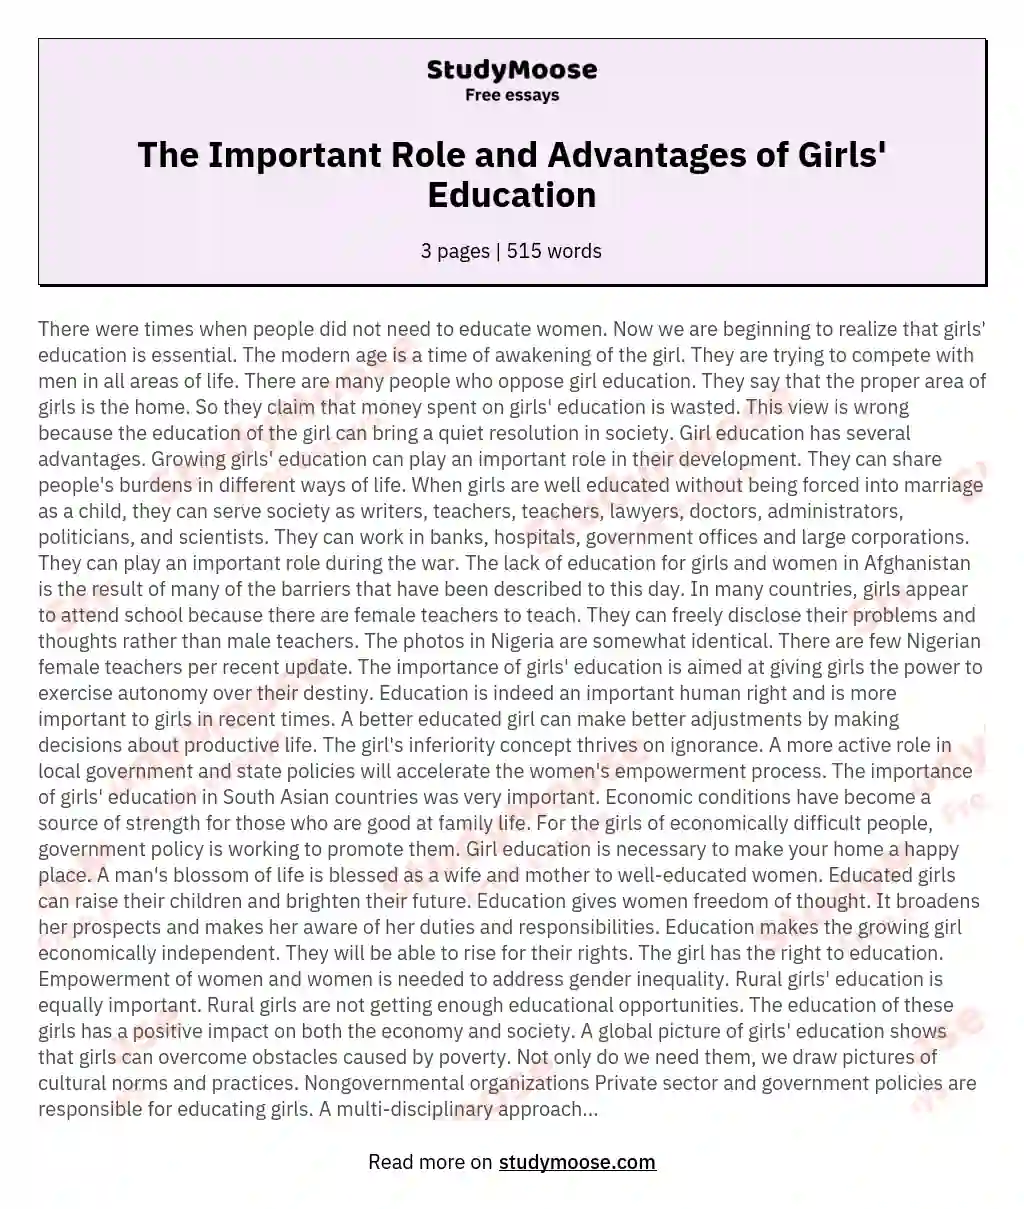 The Important Role and Advantages of Girls' Education essay